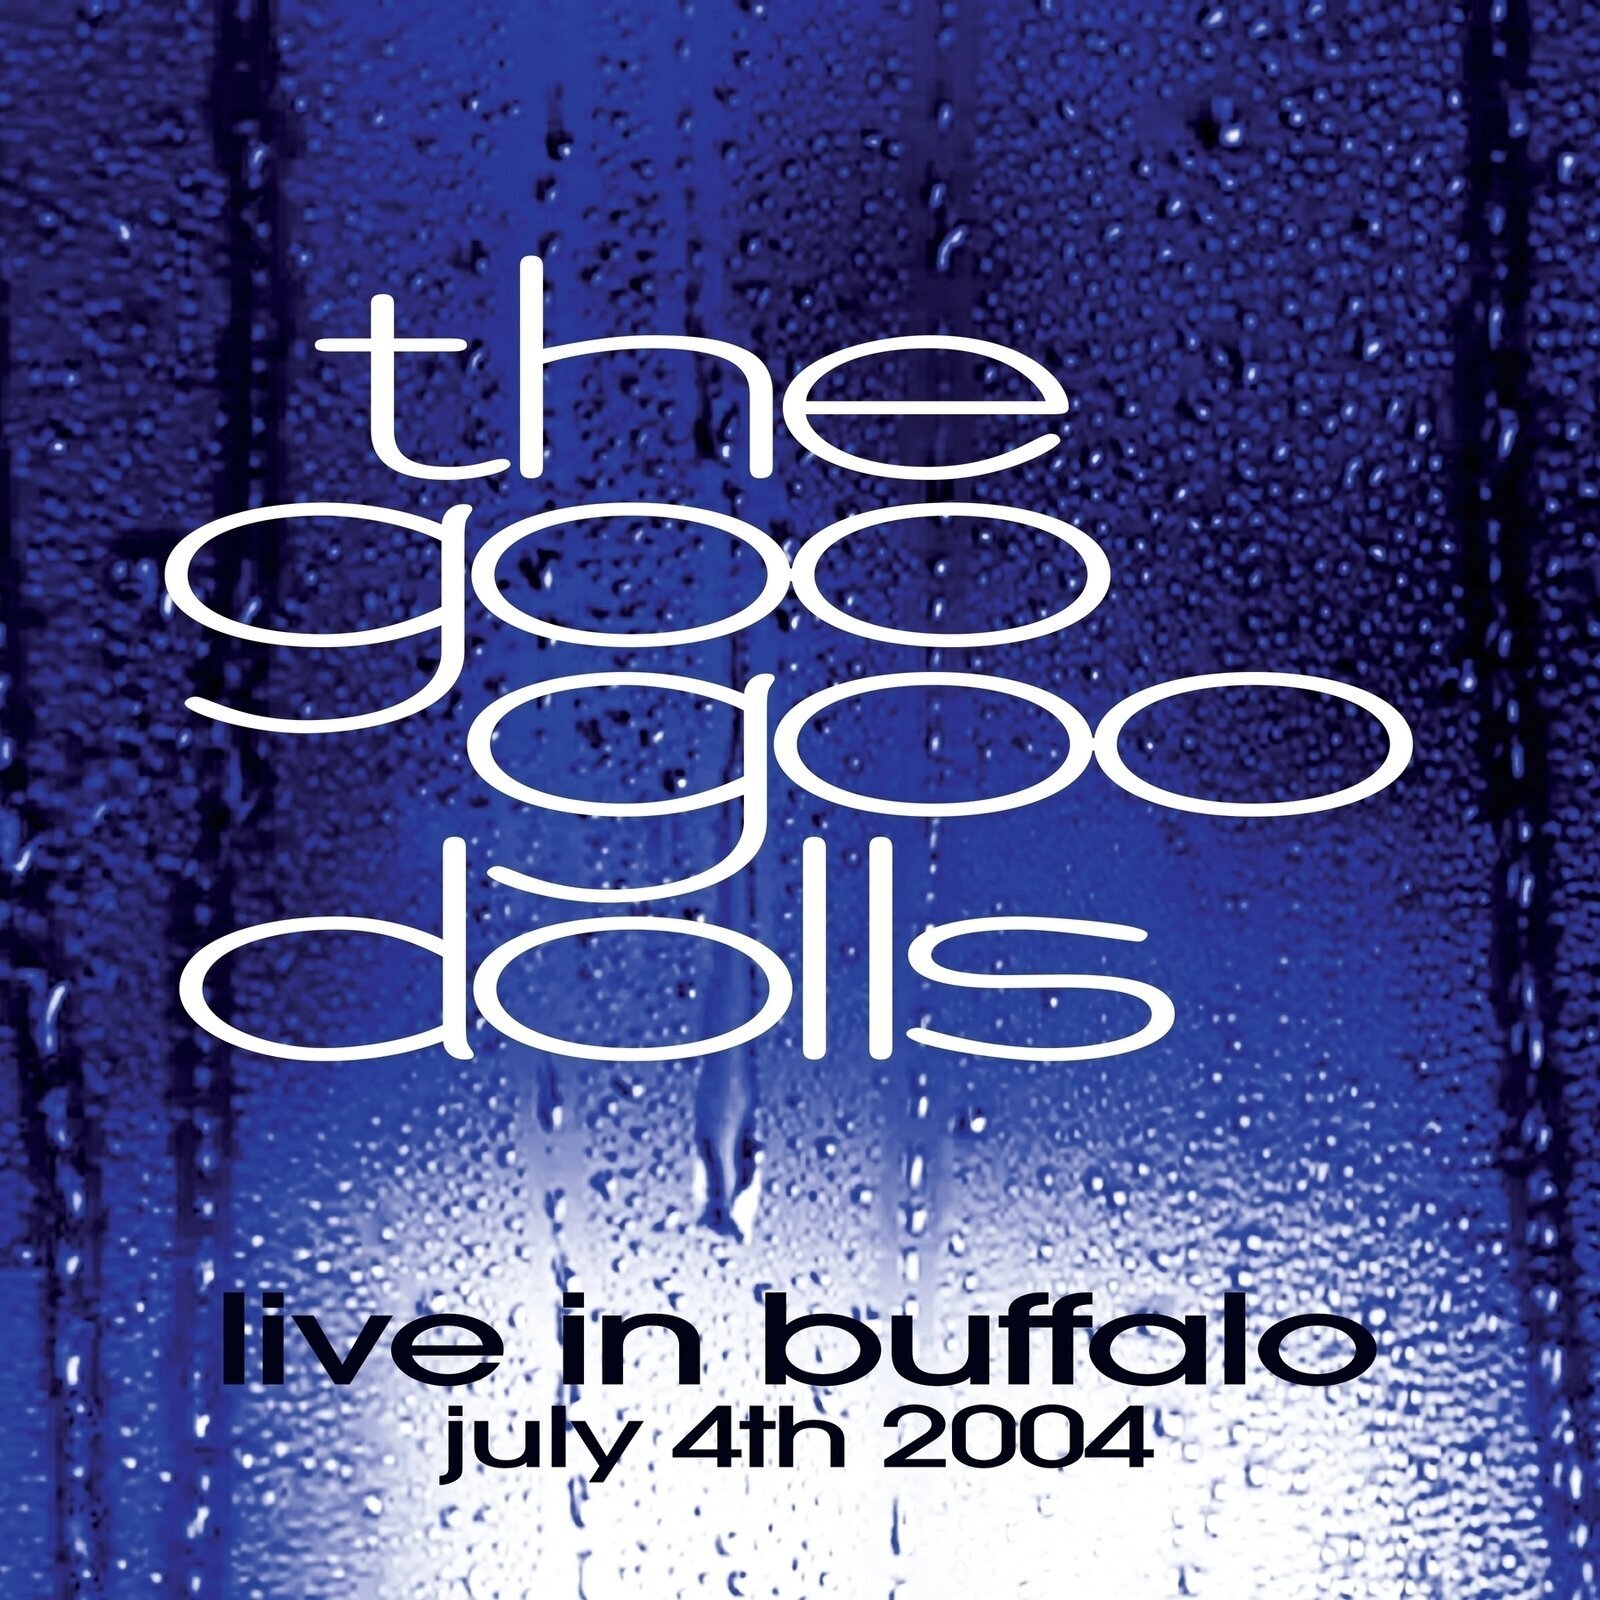 Goo Goo Dolls - Live In Buffalo July 4th 2004 (Limited Edition) (Clear Coloured) (2 LP)